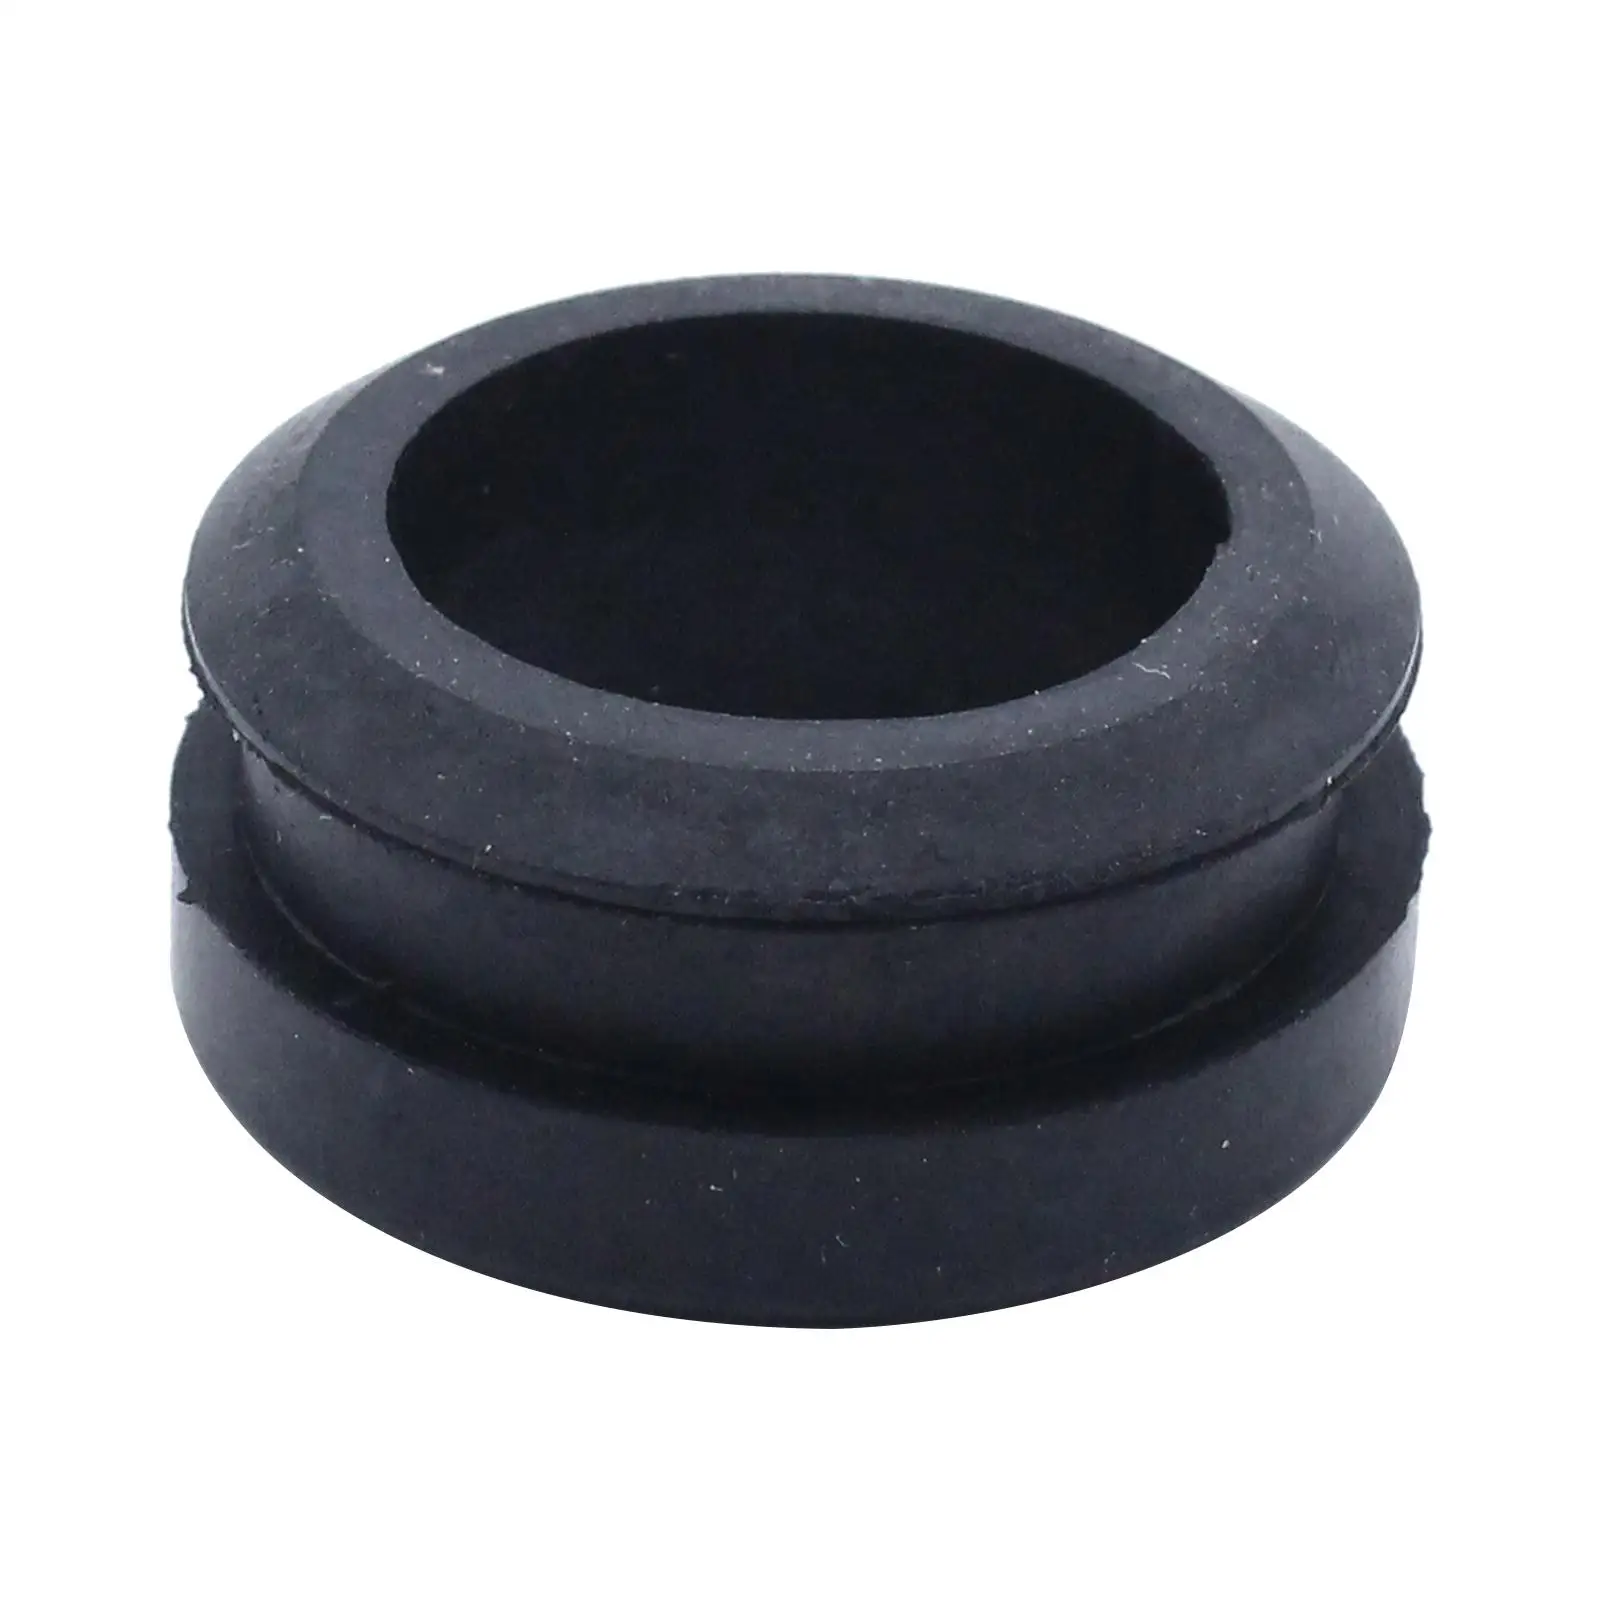 Rubber Breather/Pcv Grommet Valve Cover Grommets Fits for Chrome Steel Valve Covers ACC